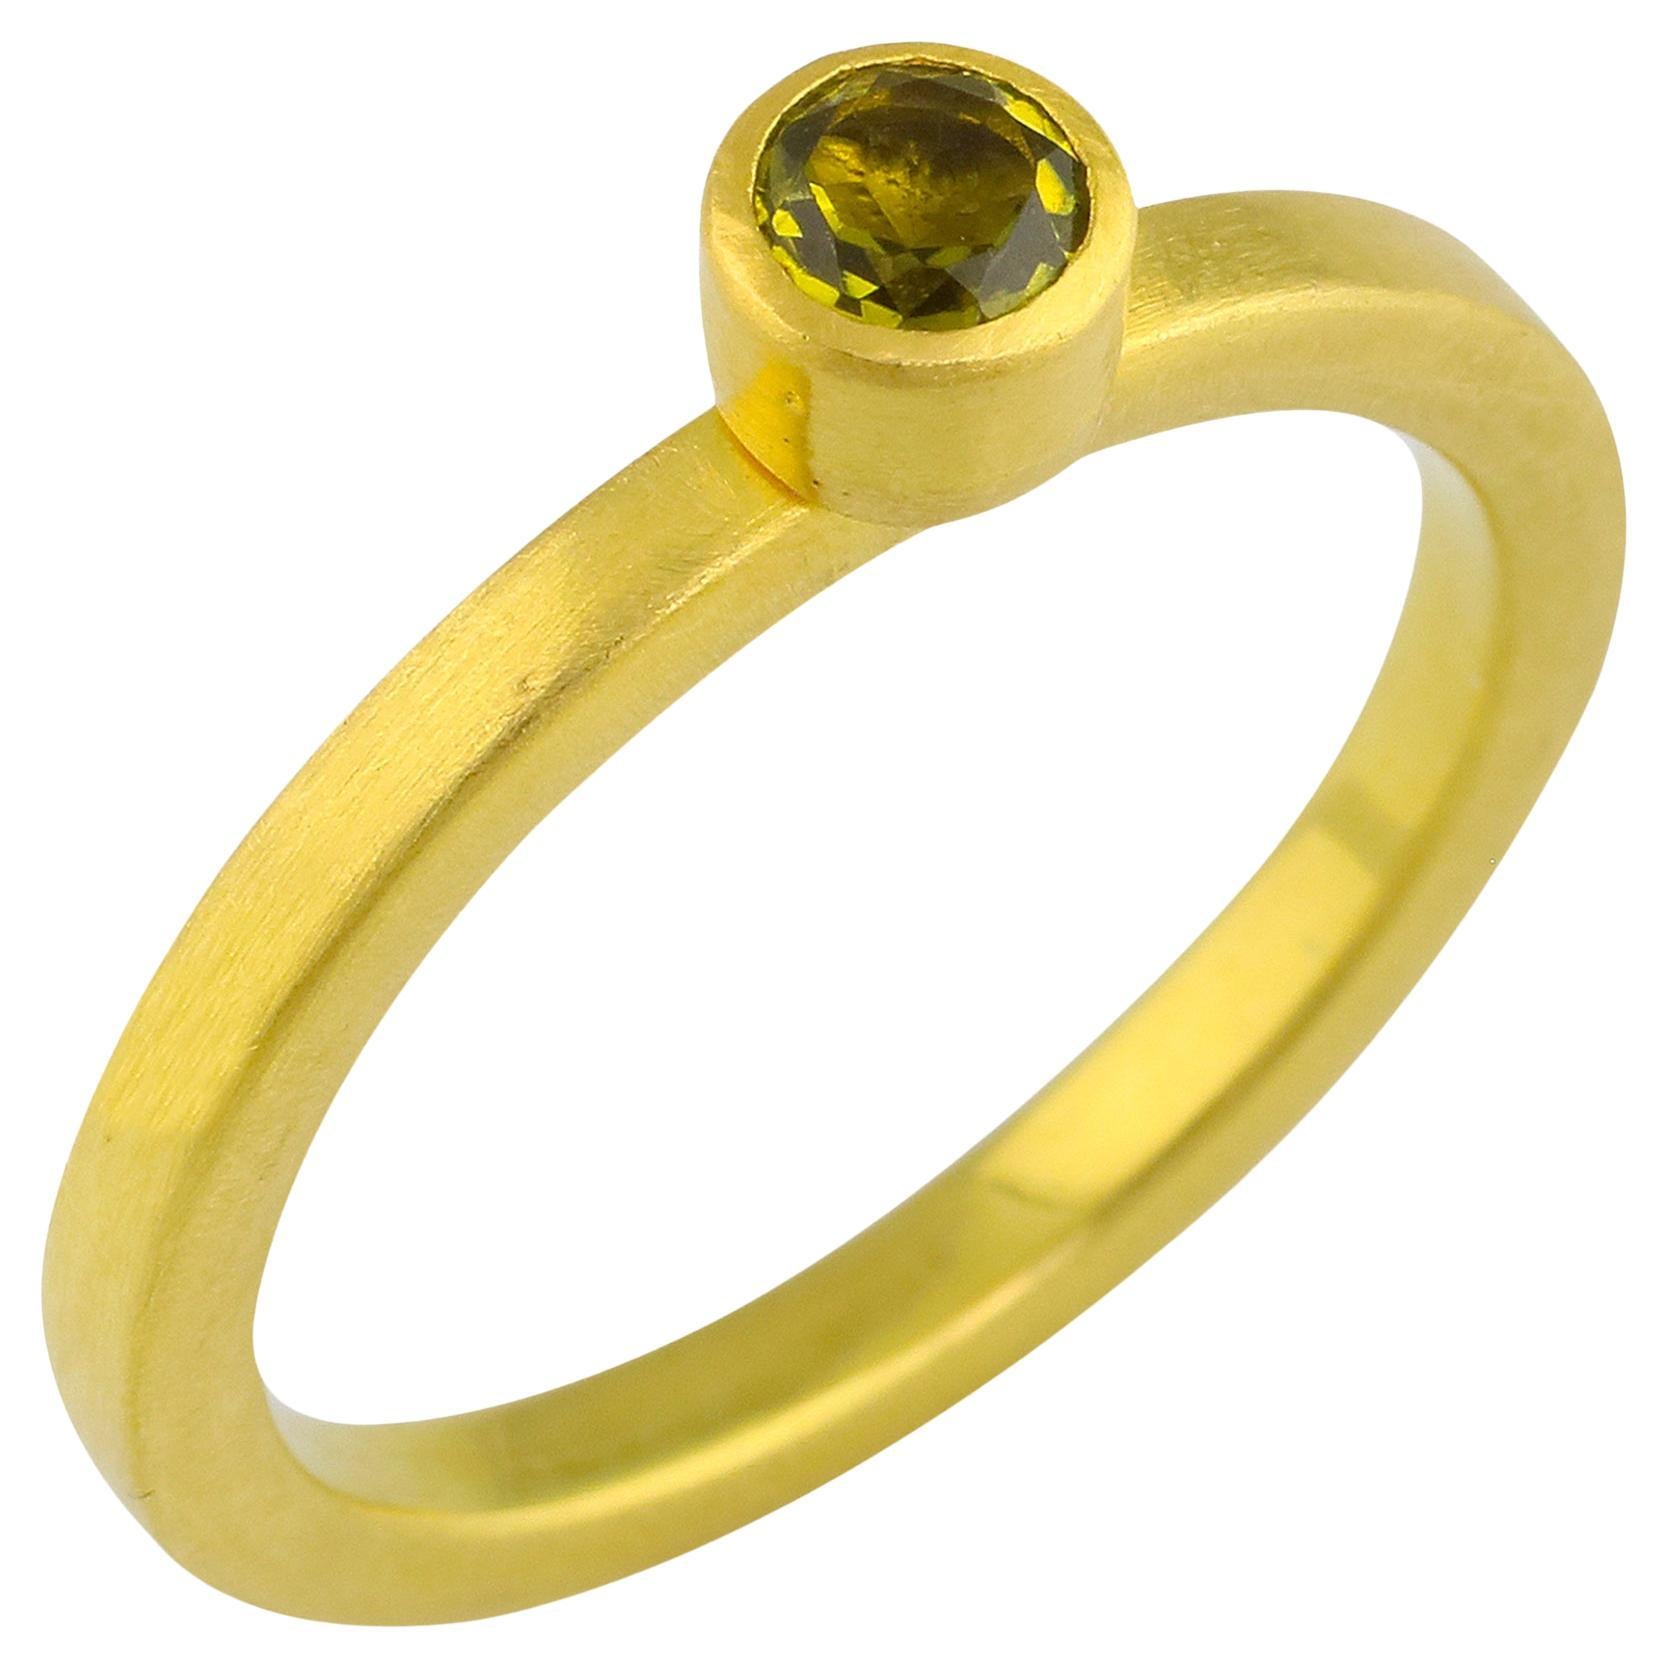 PHILIPPE SPENCER .24 Ct. Olive Tourmaline in 22K and 20K Gold Solitaire Ring